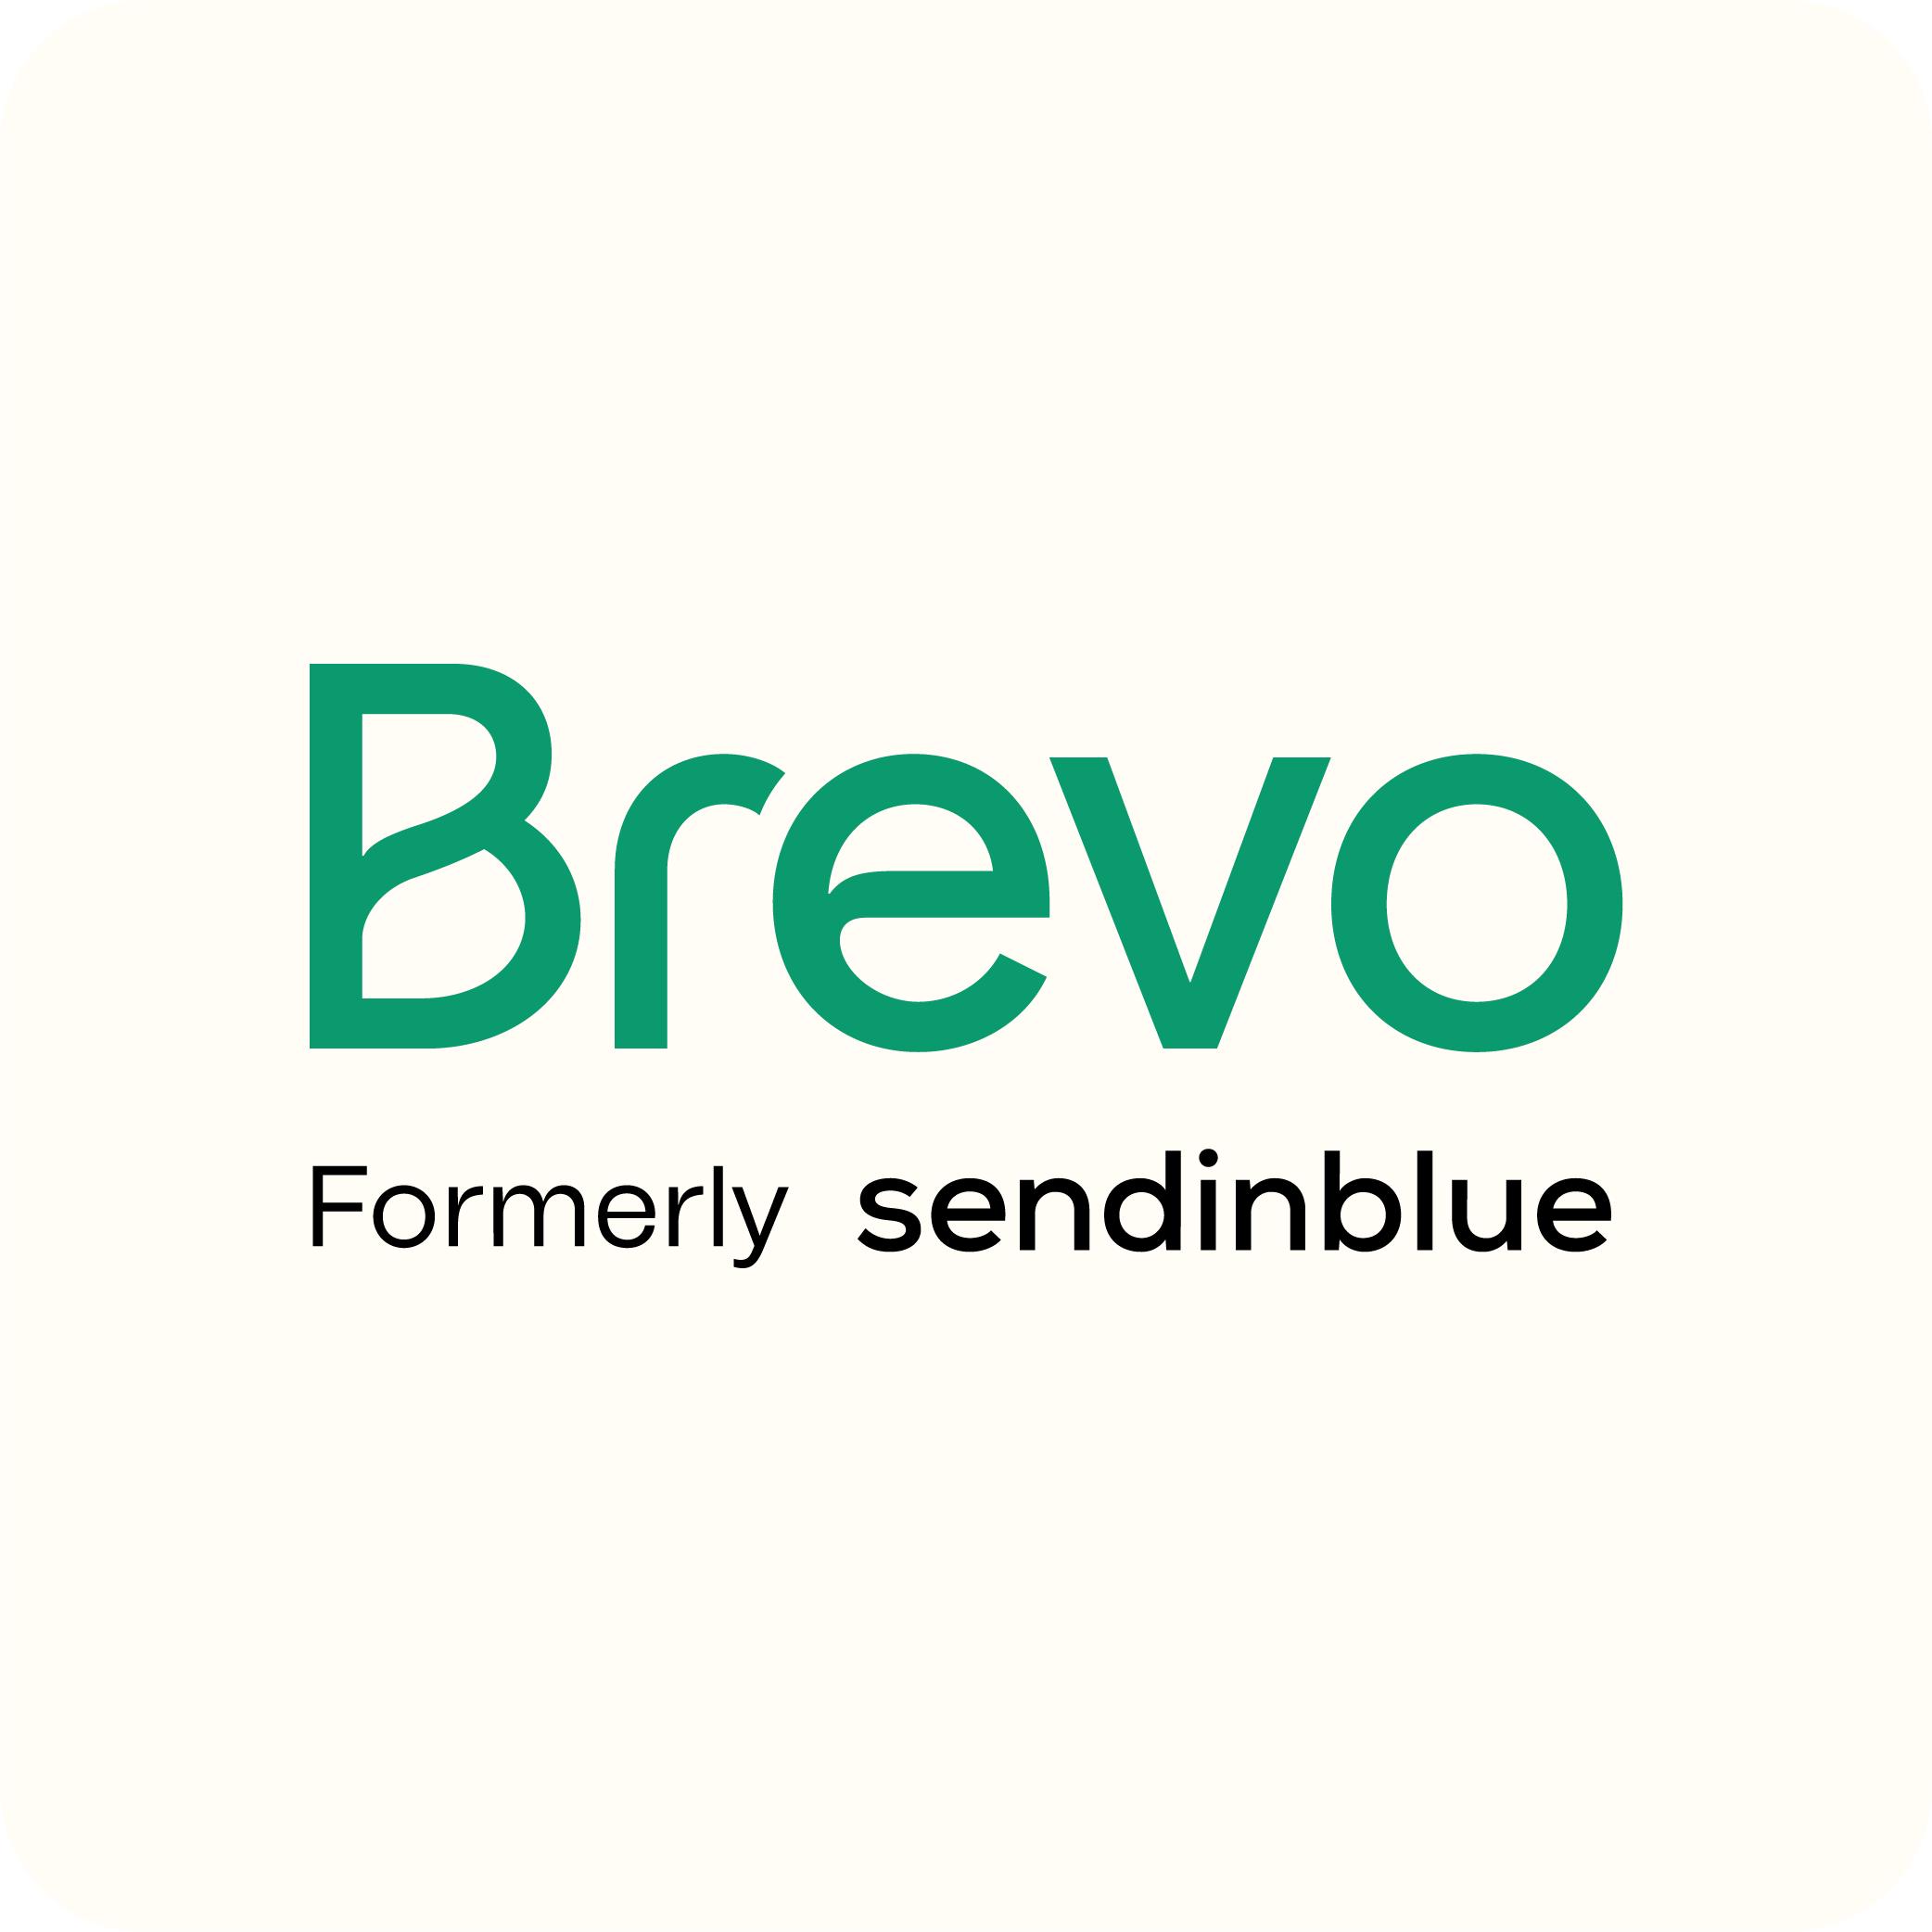 Brevo marketing and CRM tools such as Email, SMS, WhatsApp, Chat, Marketing Automation, Meetings, and much more